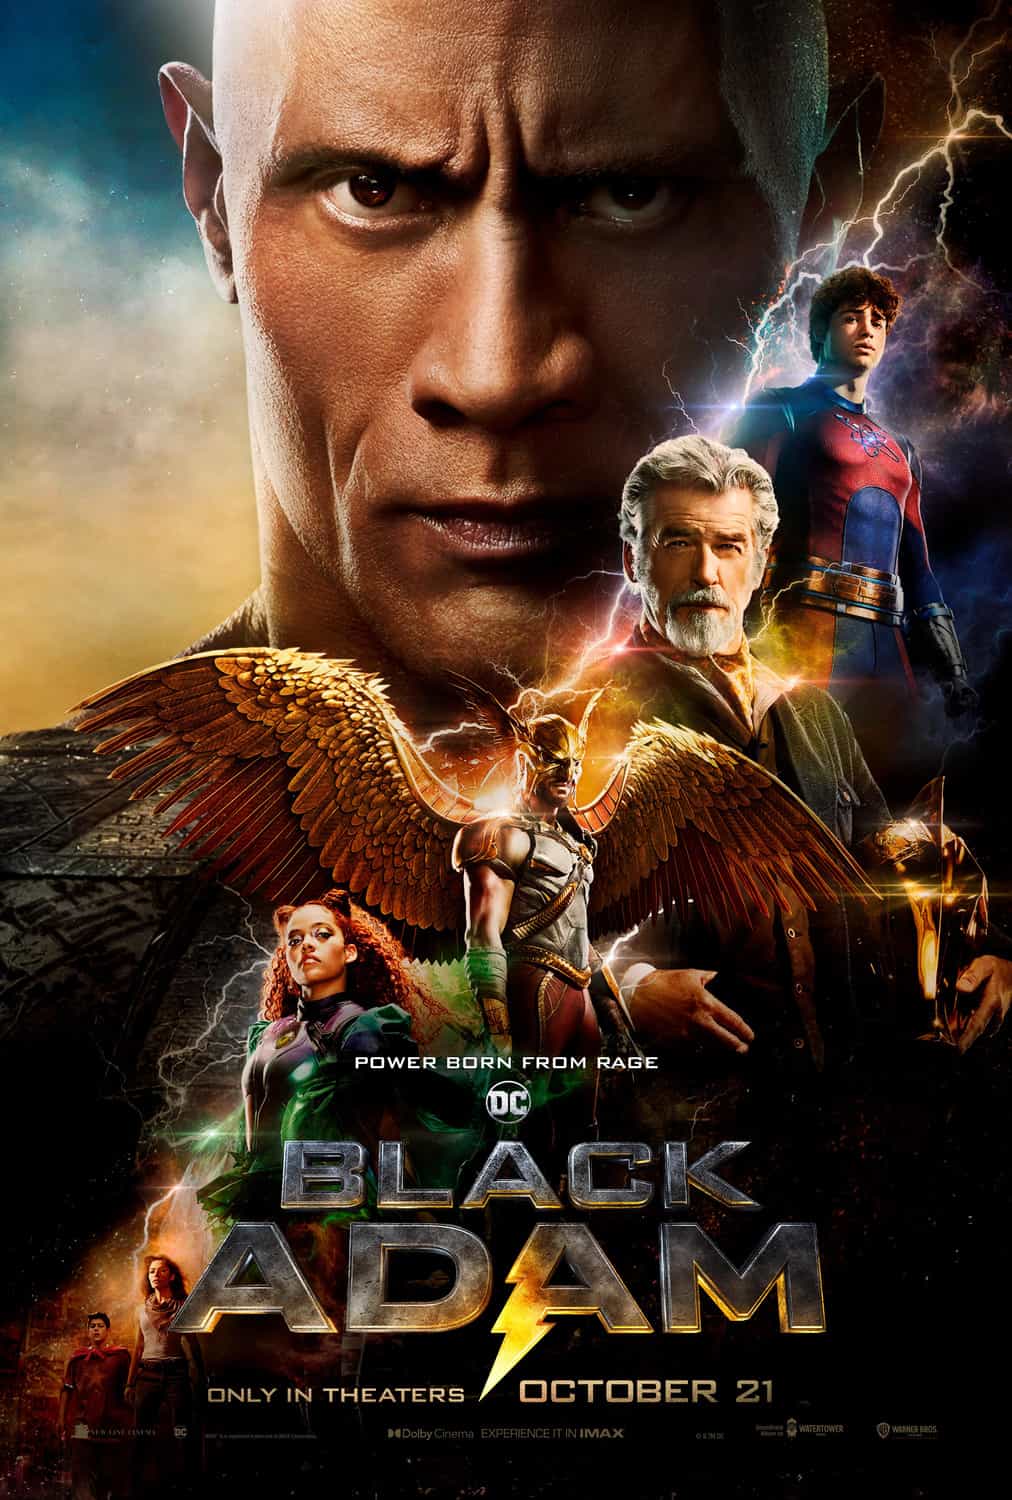 US Box Office Weekend Report 28th - 30th October 2022: Black Adam stays on top of the US box office for a second weekend with Prey For the Devil the top new movie